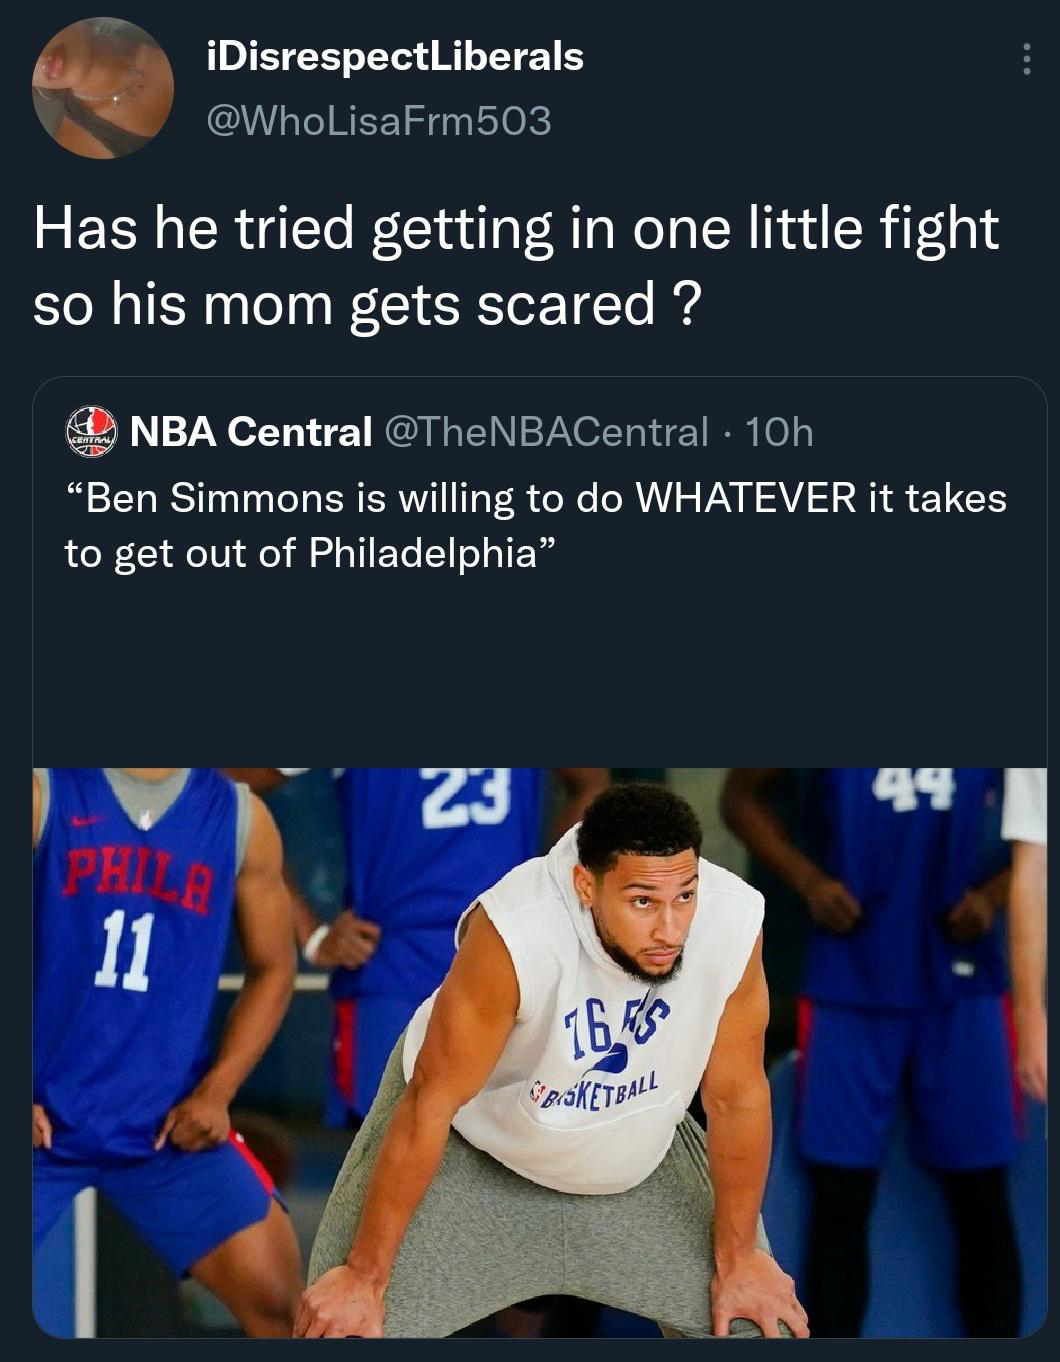 doc rivers ben simmons - O iDisrespectLiberals Frm503 Has he tried getting in one little fight so his mom gets scared ? Centrala Nba Central 10h Ben Simmons is willing to do Whatever it takes to get out of Philadelphia" Z3 49 Phila 11 16 Ks Opisketball